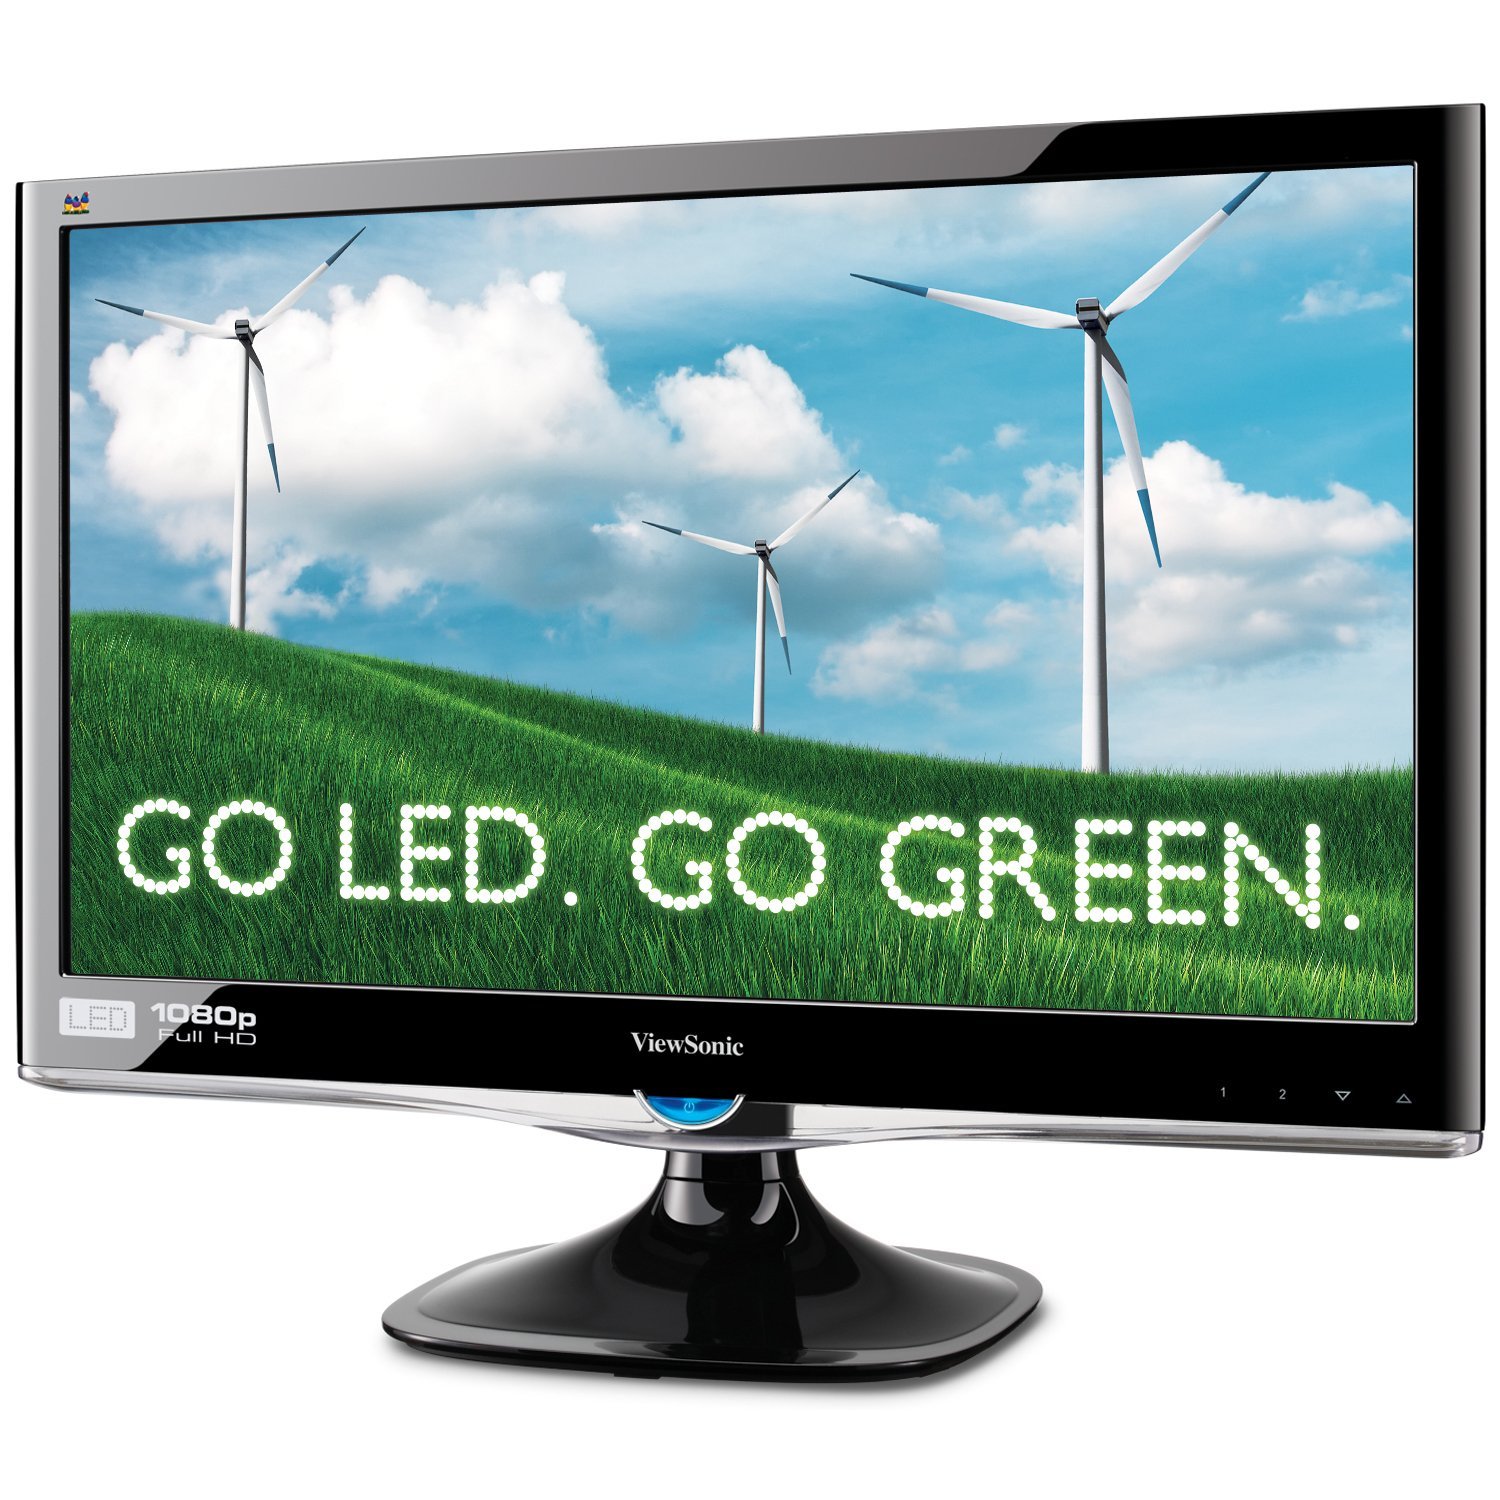 http://thetechjournal.com/wp-content/uploads/images/1108/1314411128-viewsonic-vx2250wmled-22inch-widescreen-full-hd-1080p-led-monitor-1.jpg